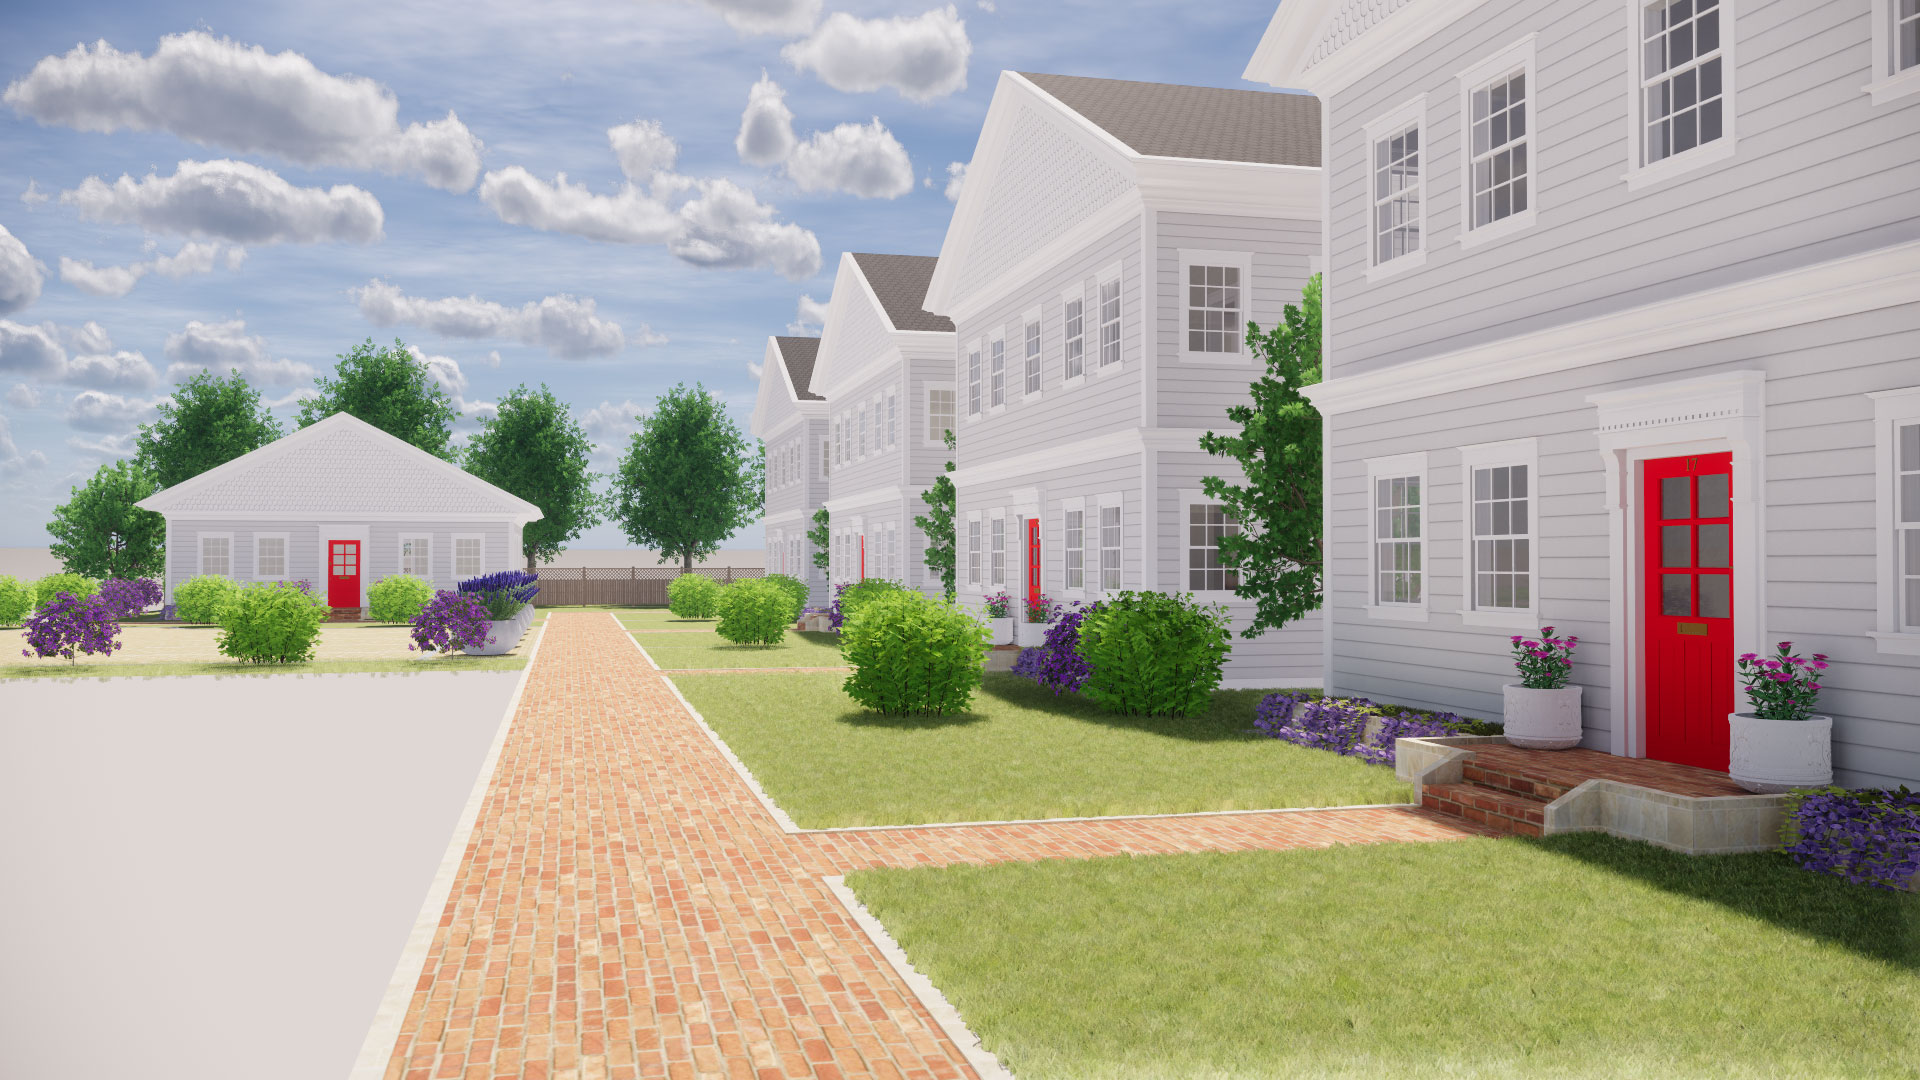 Closeup exterior render of line of 5 two- story houses along brick path, blue sky and clouds above.